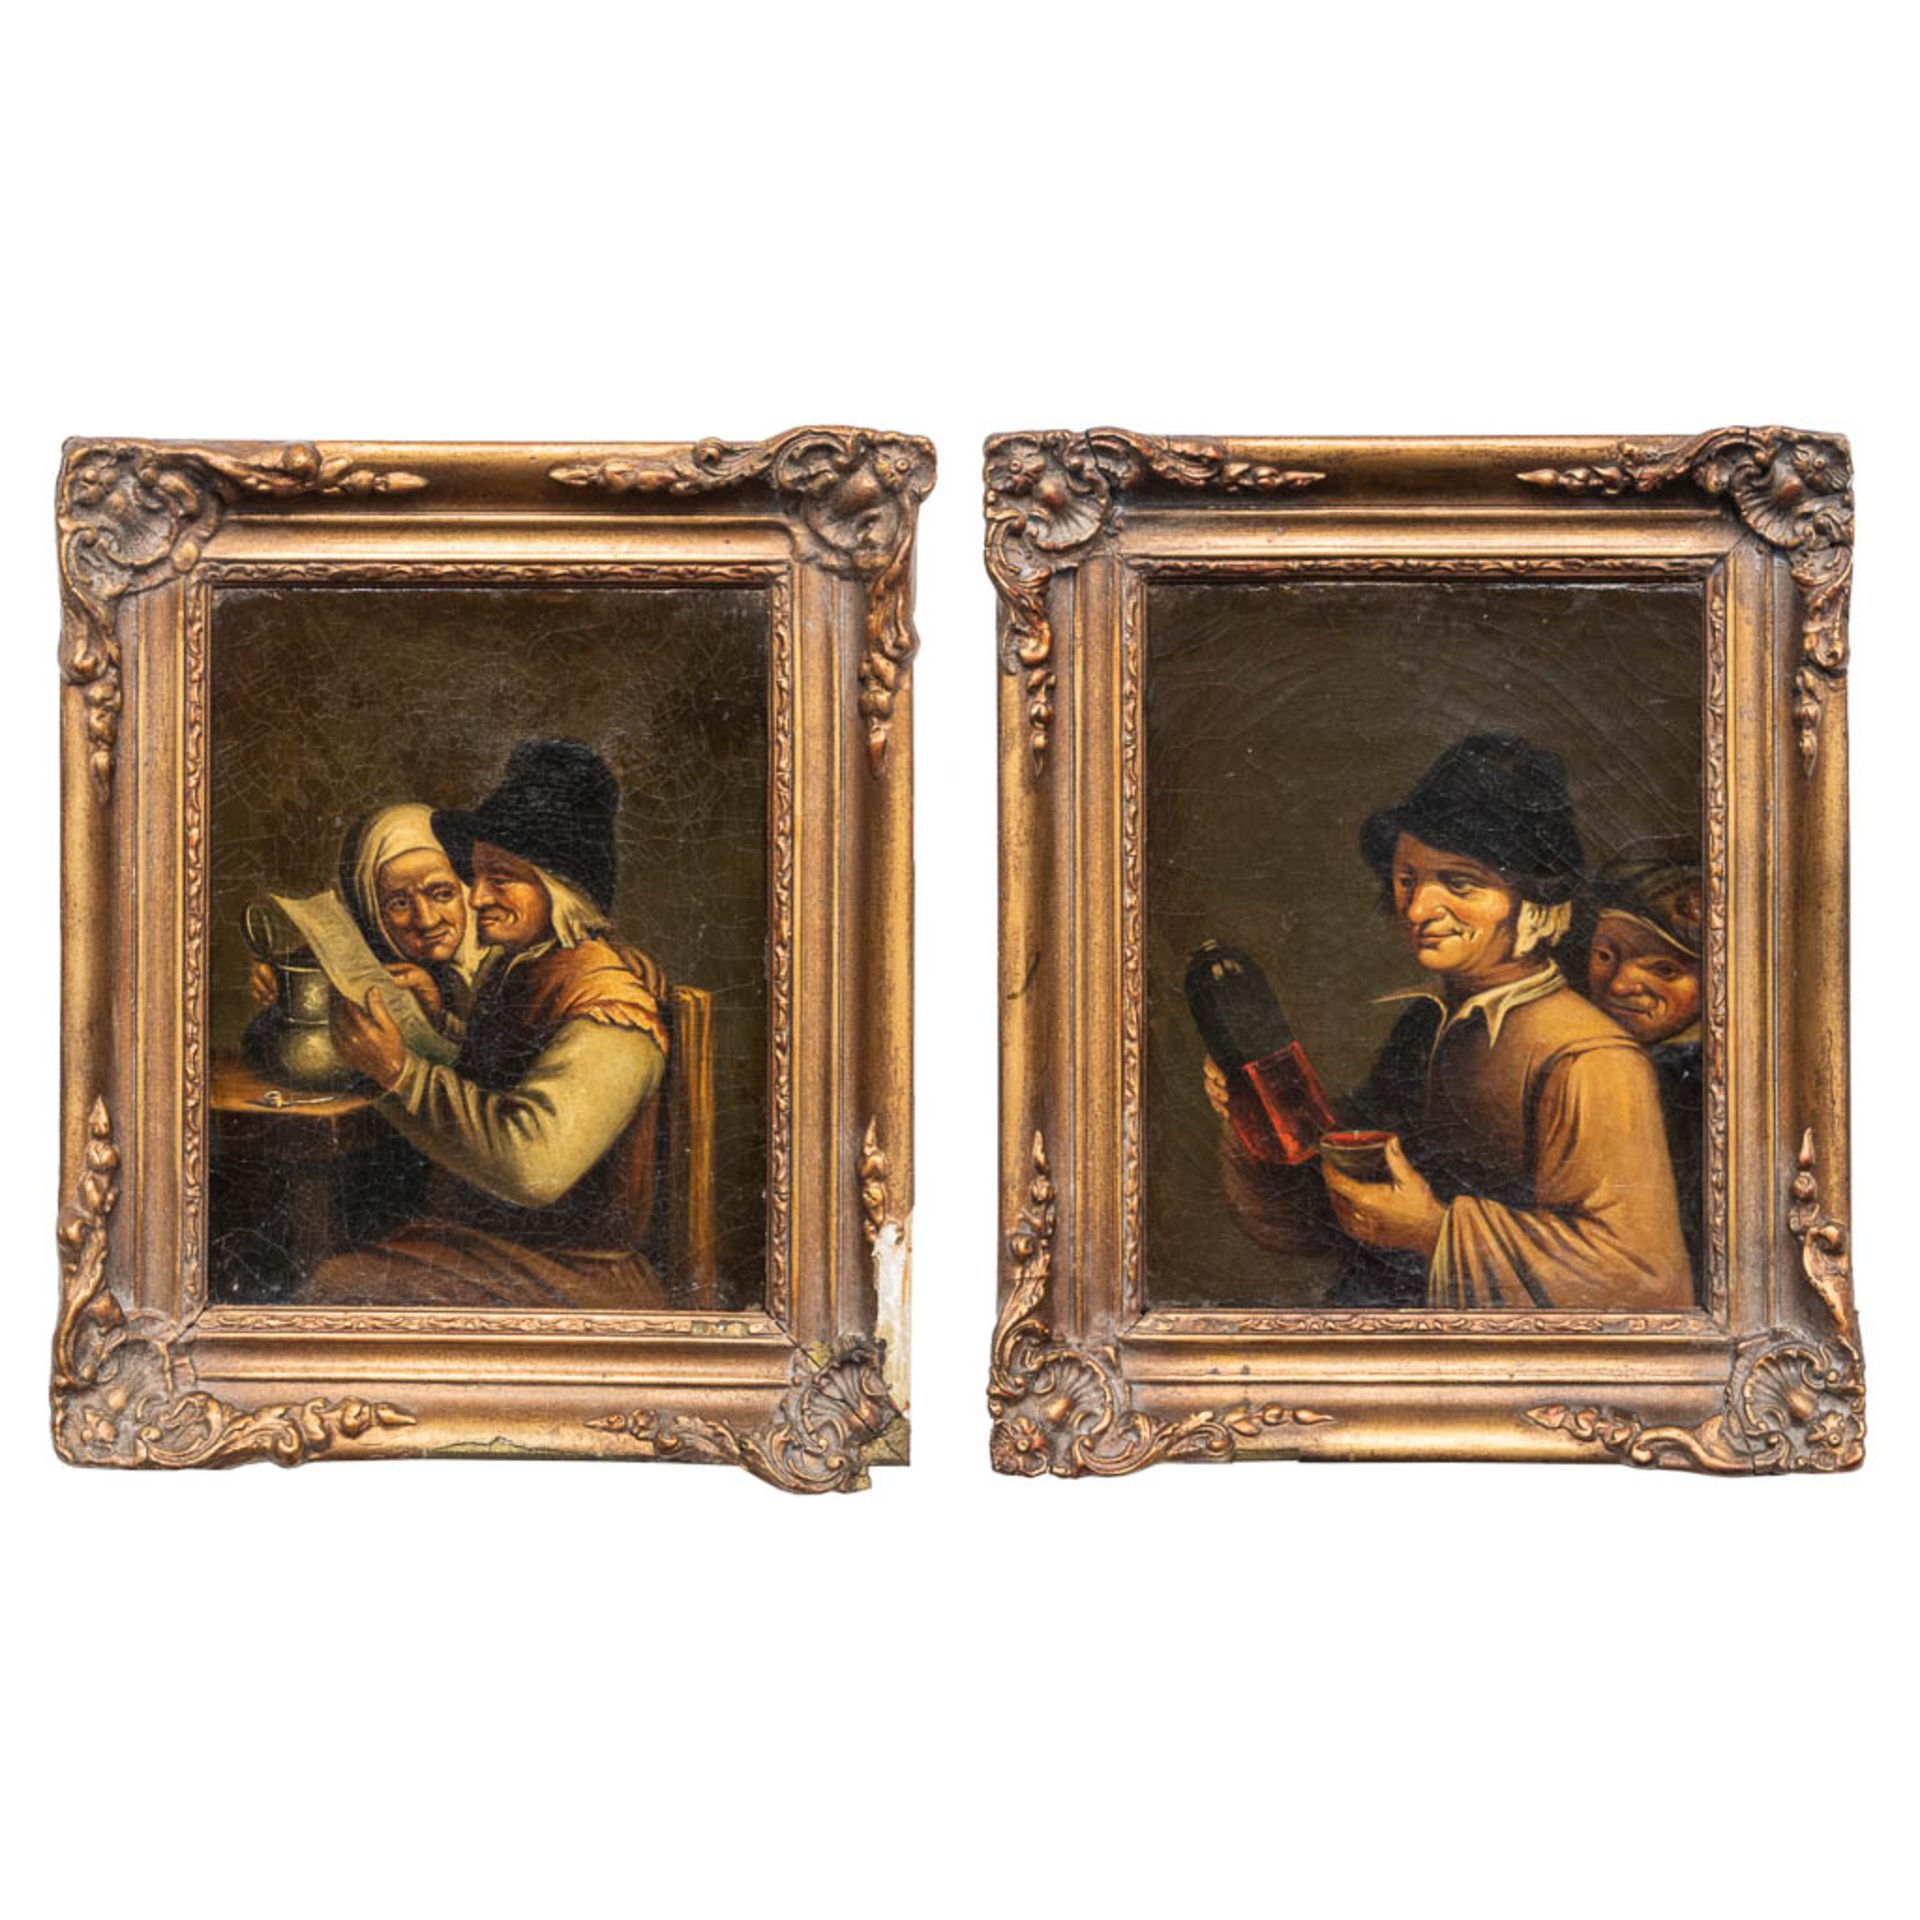 No signature found, a pair of scenes with figurines, 18th-19th century. Oil on canvas. (21,5 x 27 cm